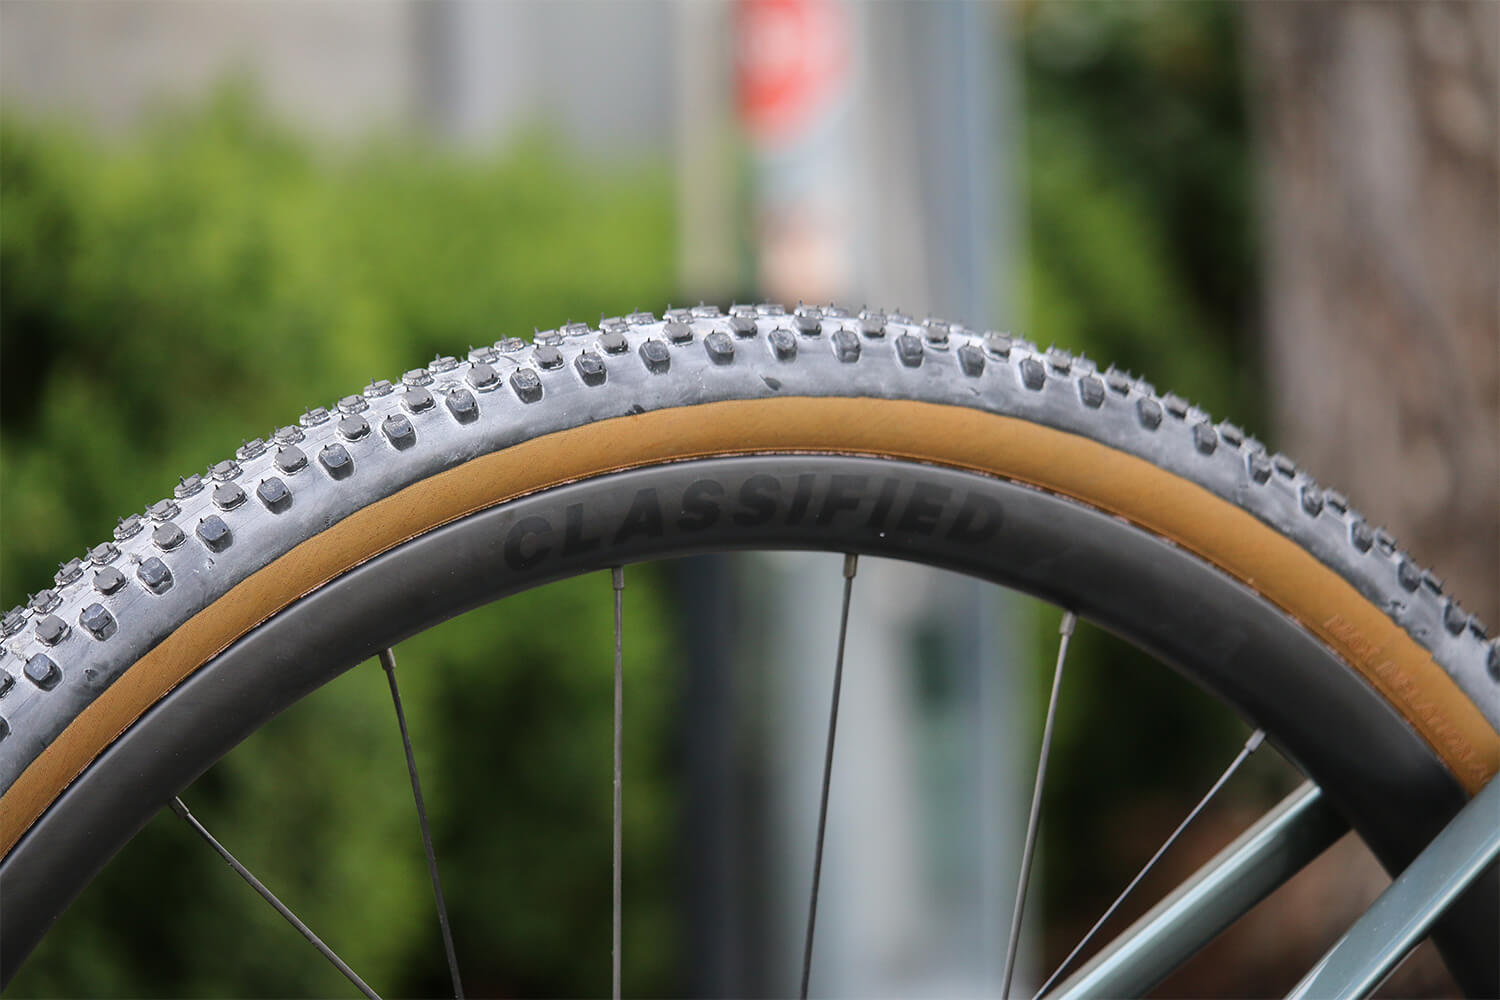 Classified Powershift Hub Contender Bicycles gravel wheelset in stock